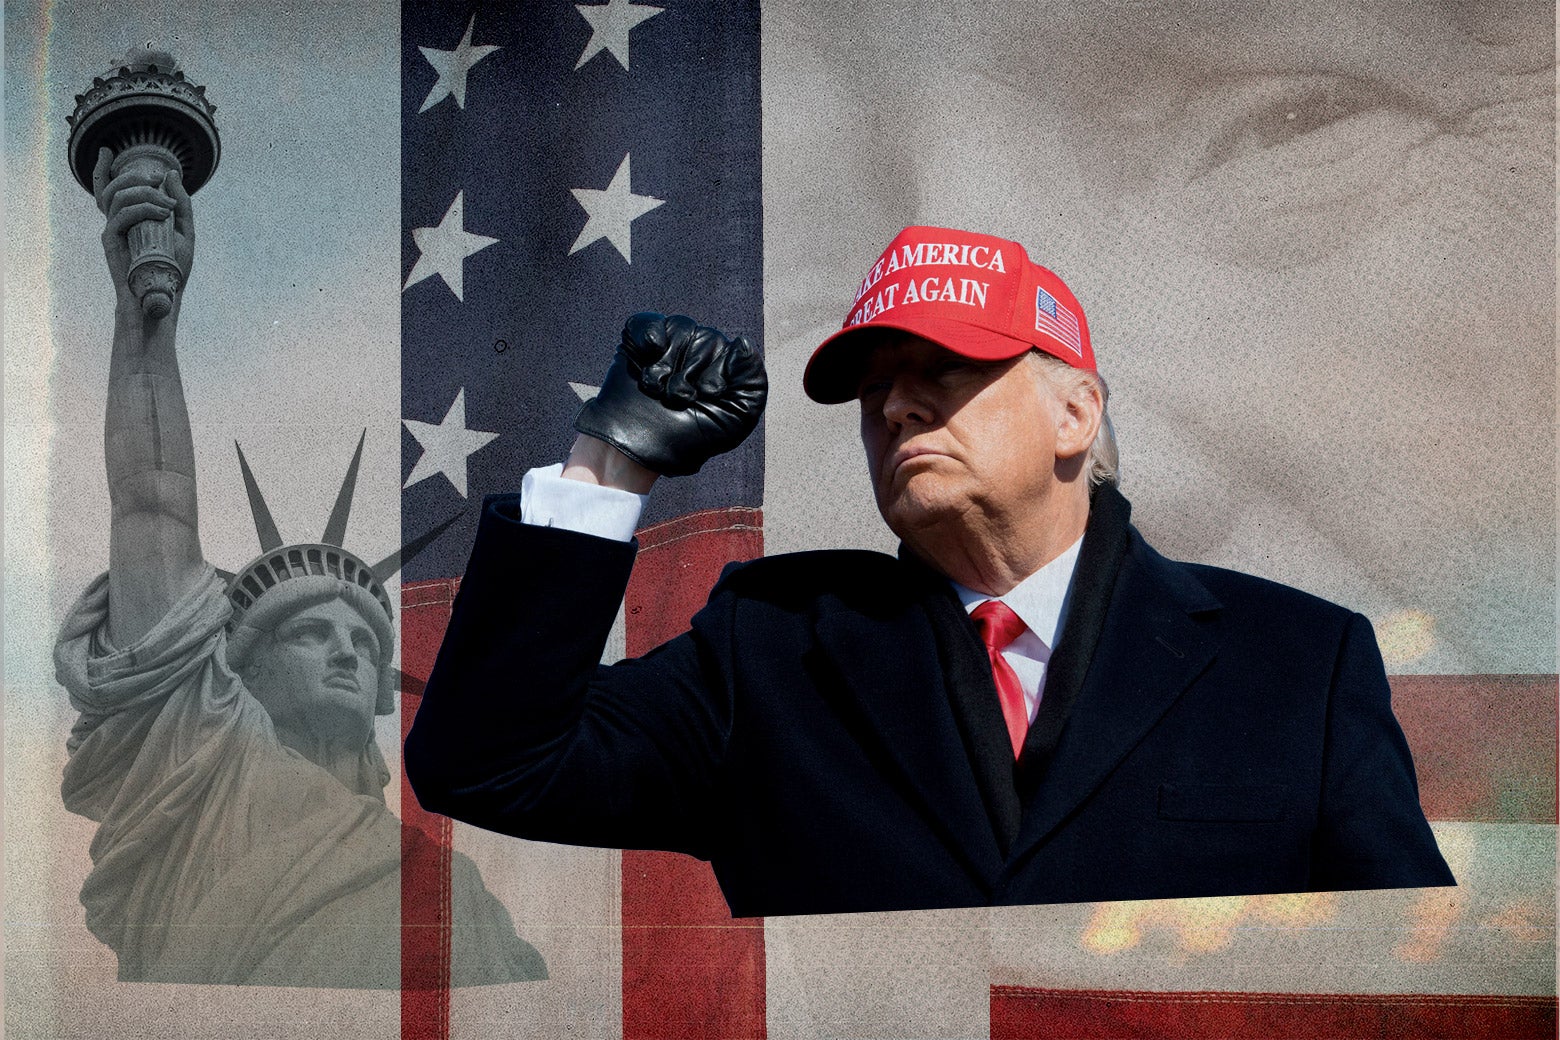 Trump, wearing a red MAGA hat, raises his right hand in a fist, over a background of the Statue of Liberty.